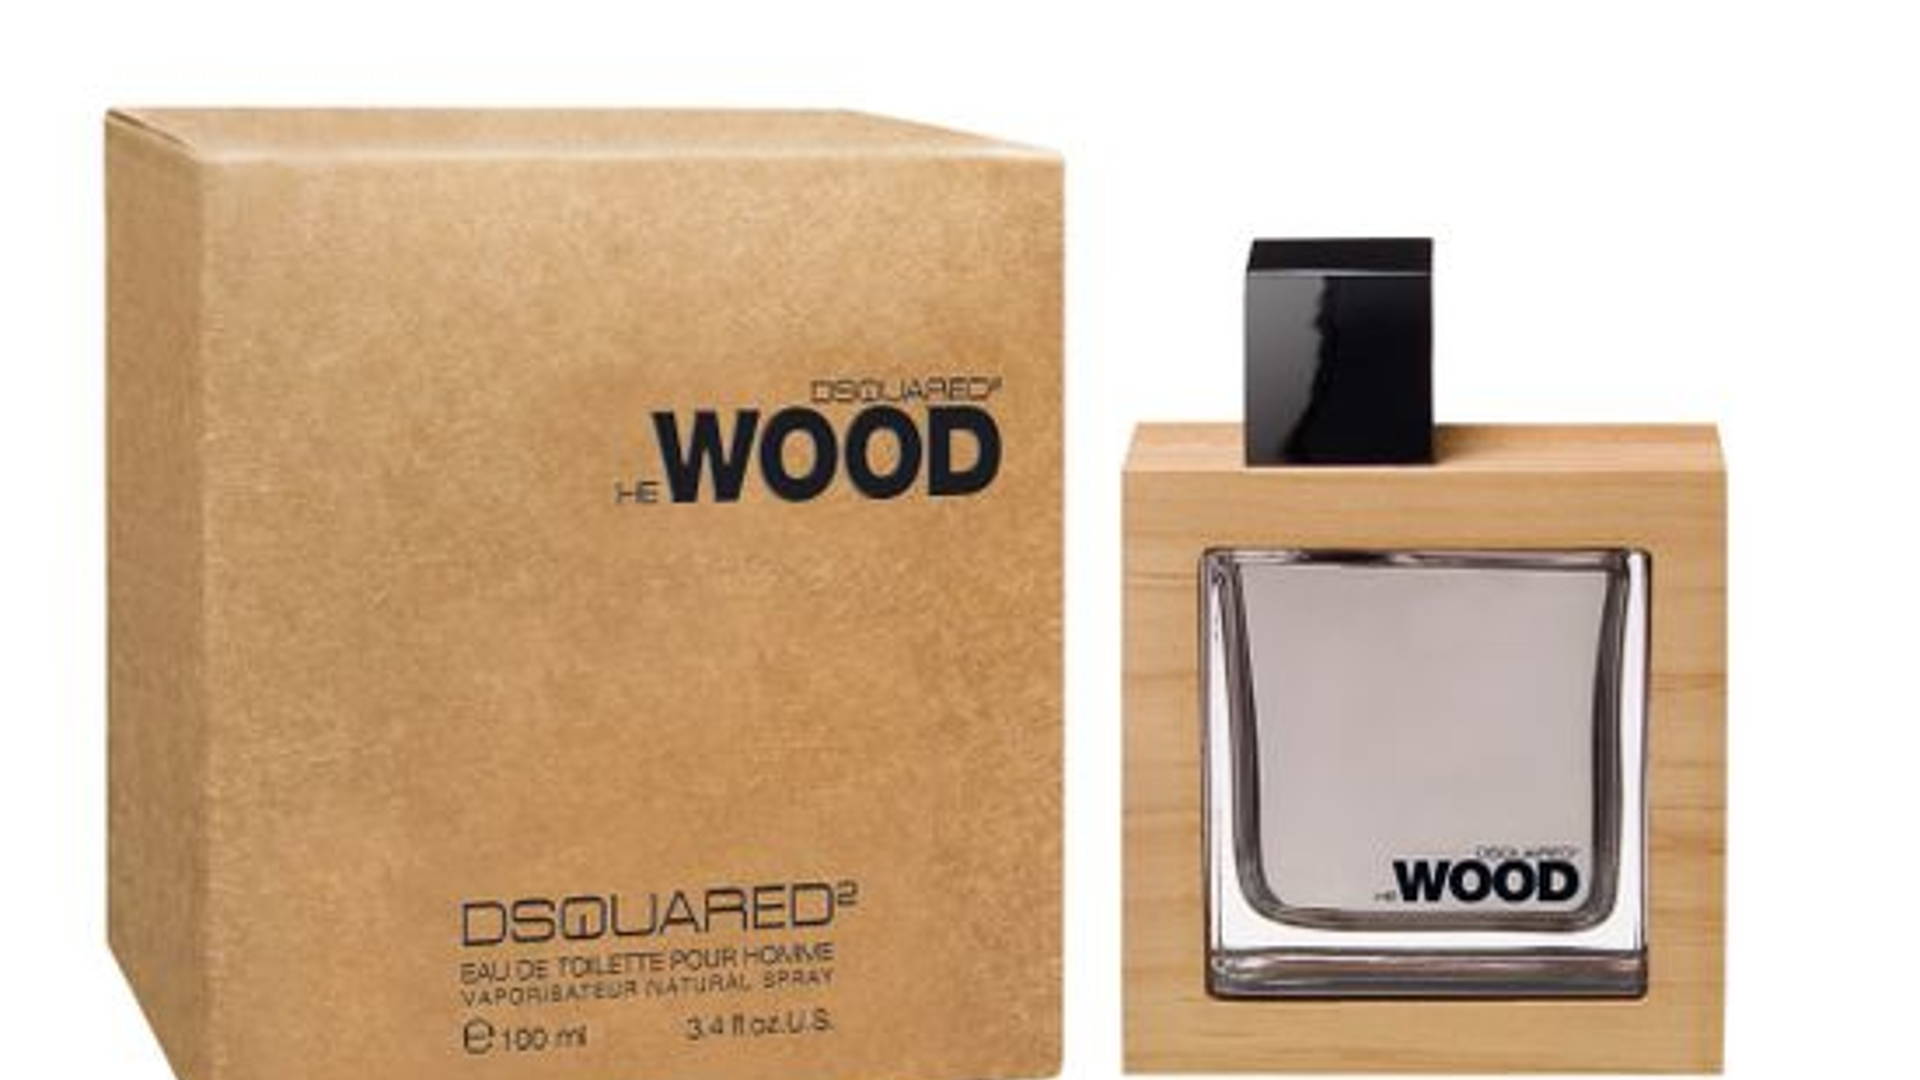 dsquared packaging